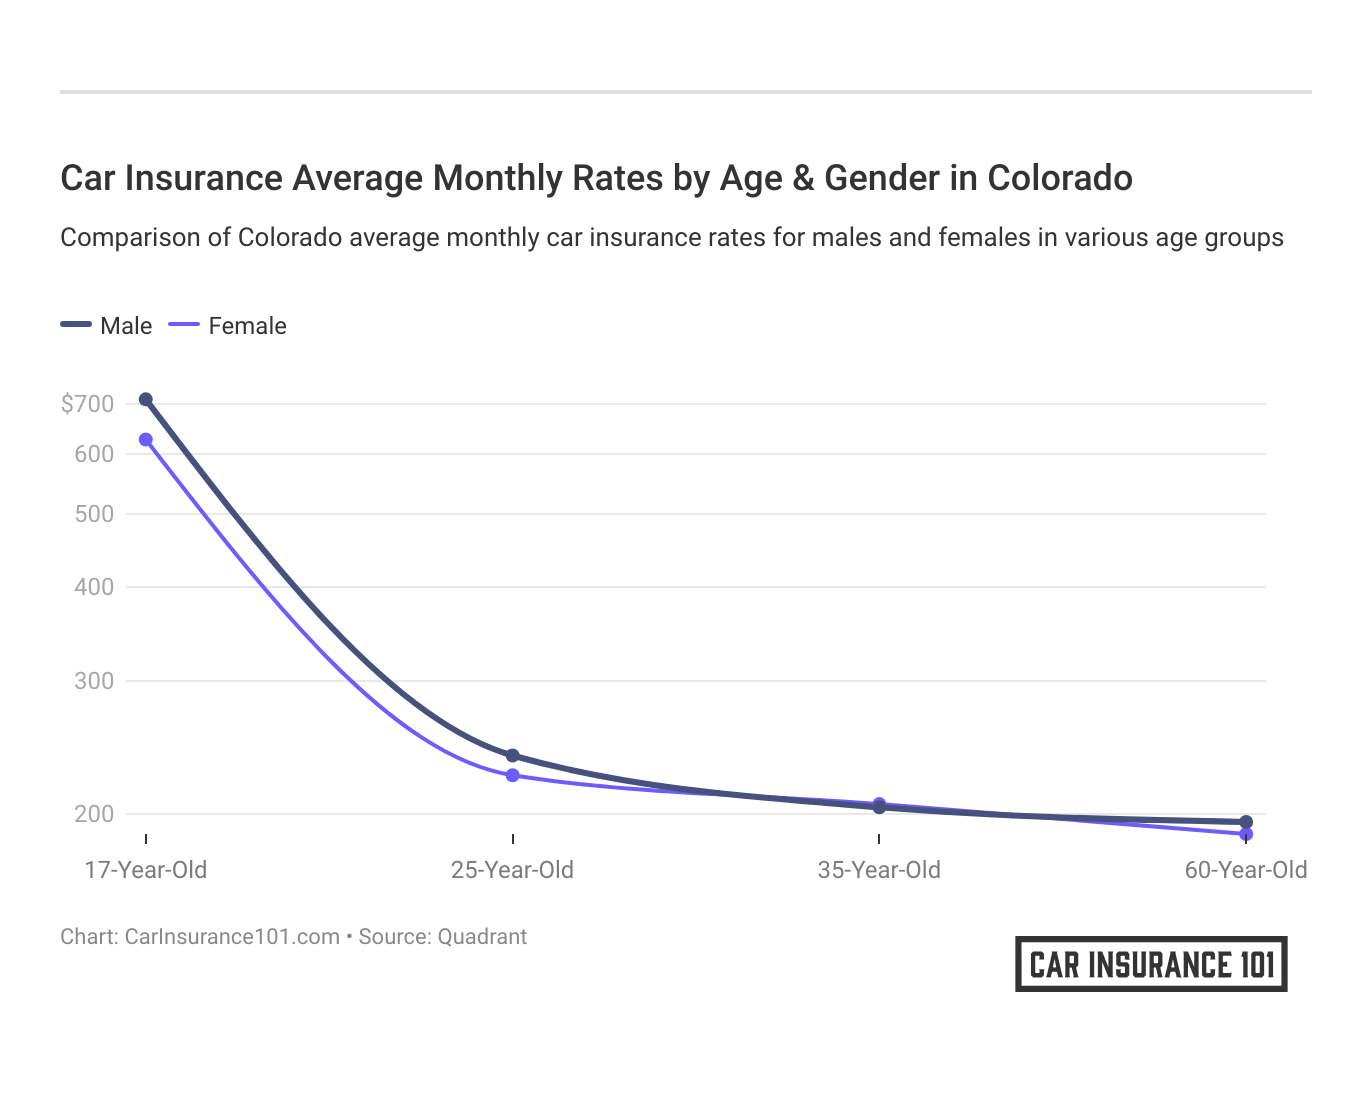 <h3>Car Insurance Average Monthly Rates by Age & Gender in Colorado</h3>